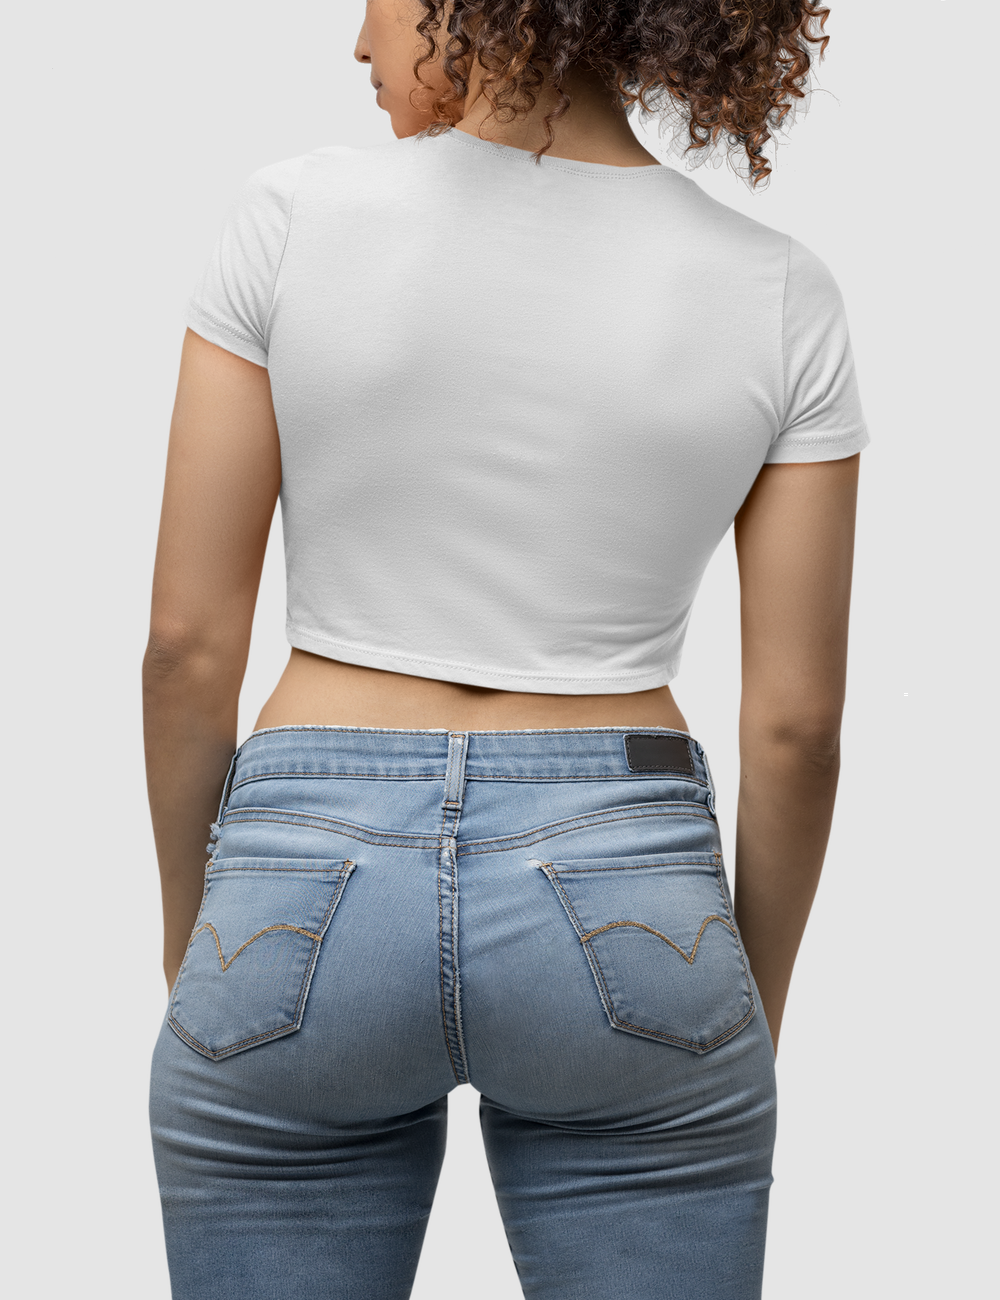 Bad Girls Are Just Way More Fun | Women's Fitted Crop Top T-Shirt OniTakai